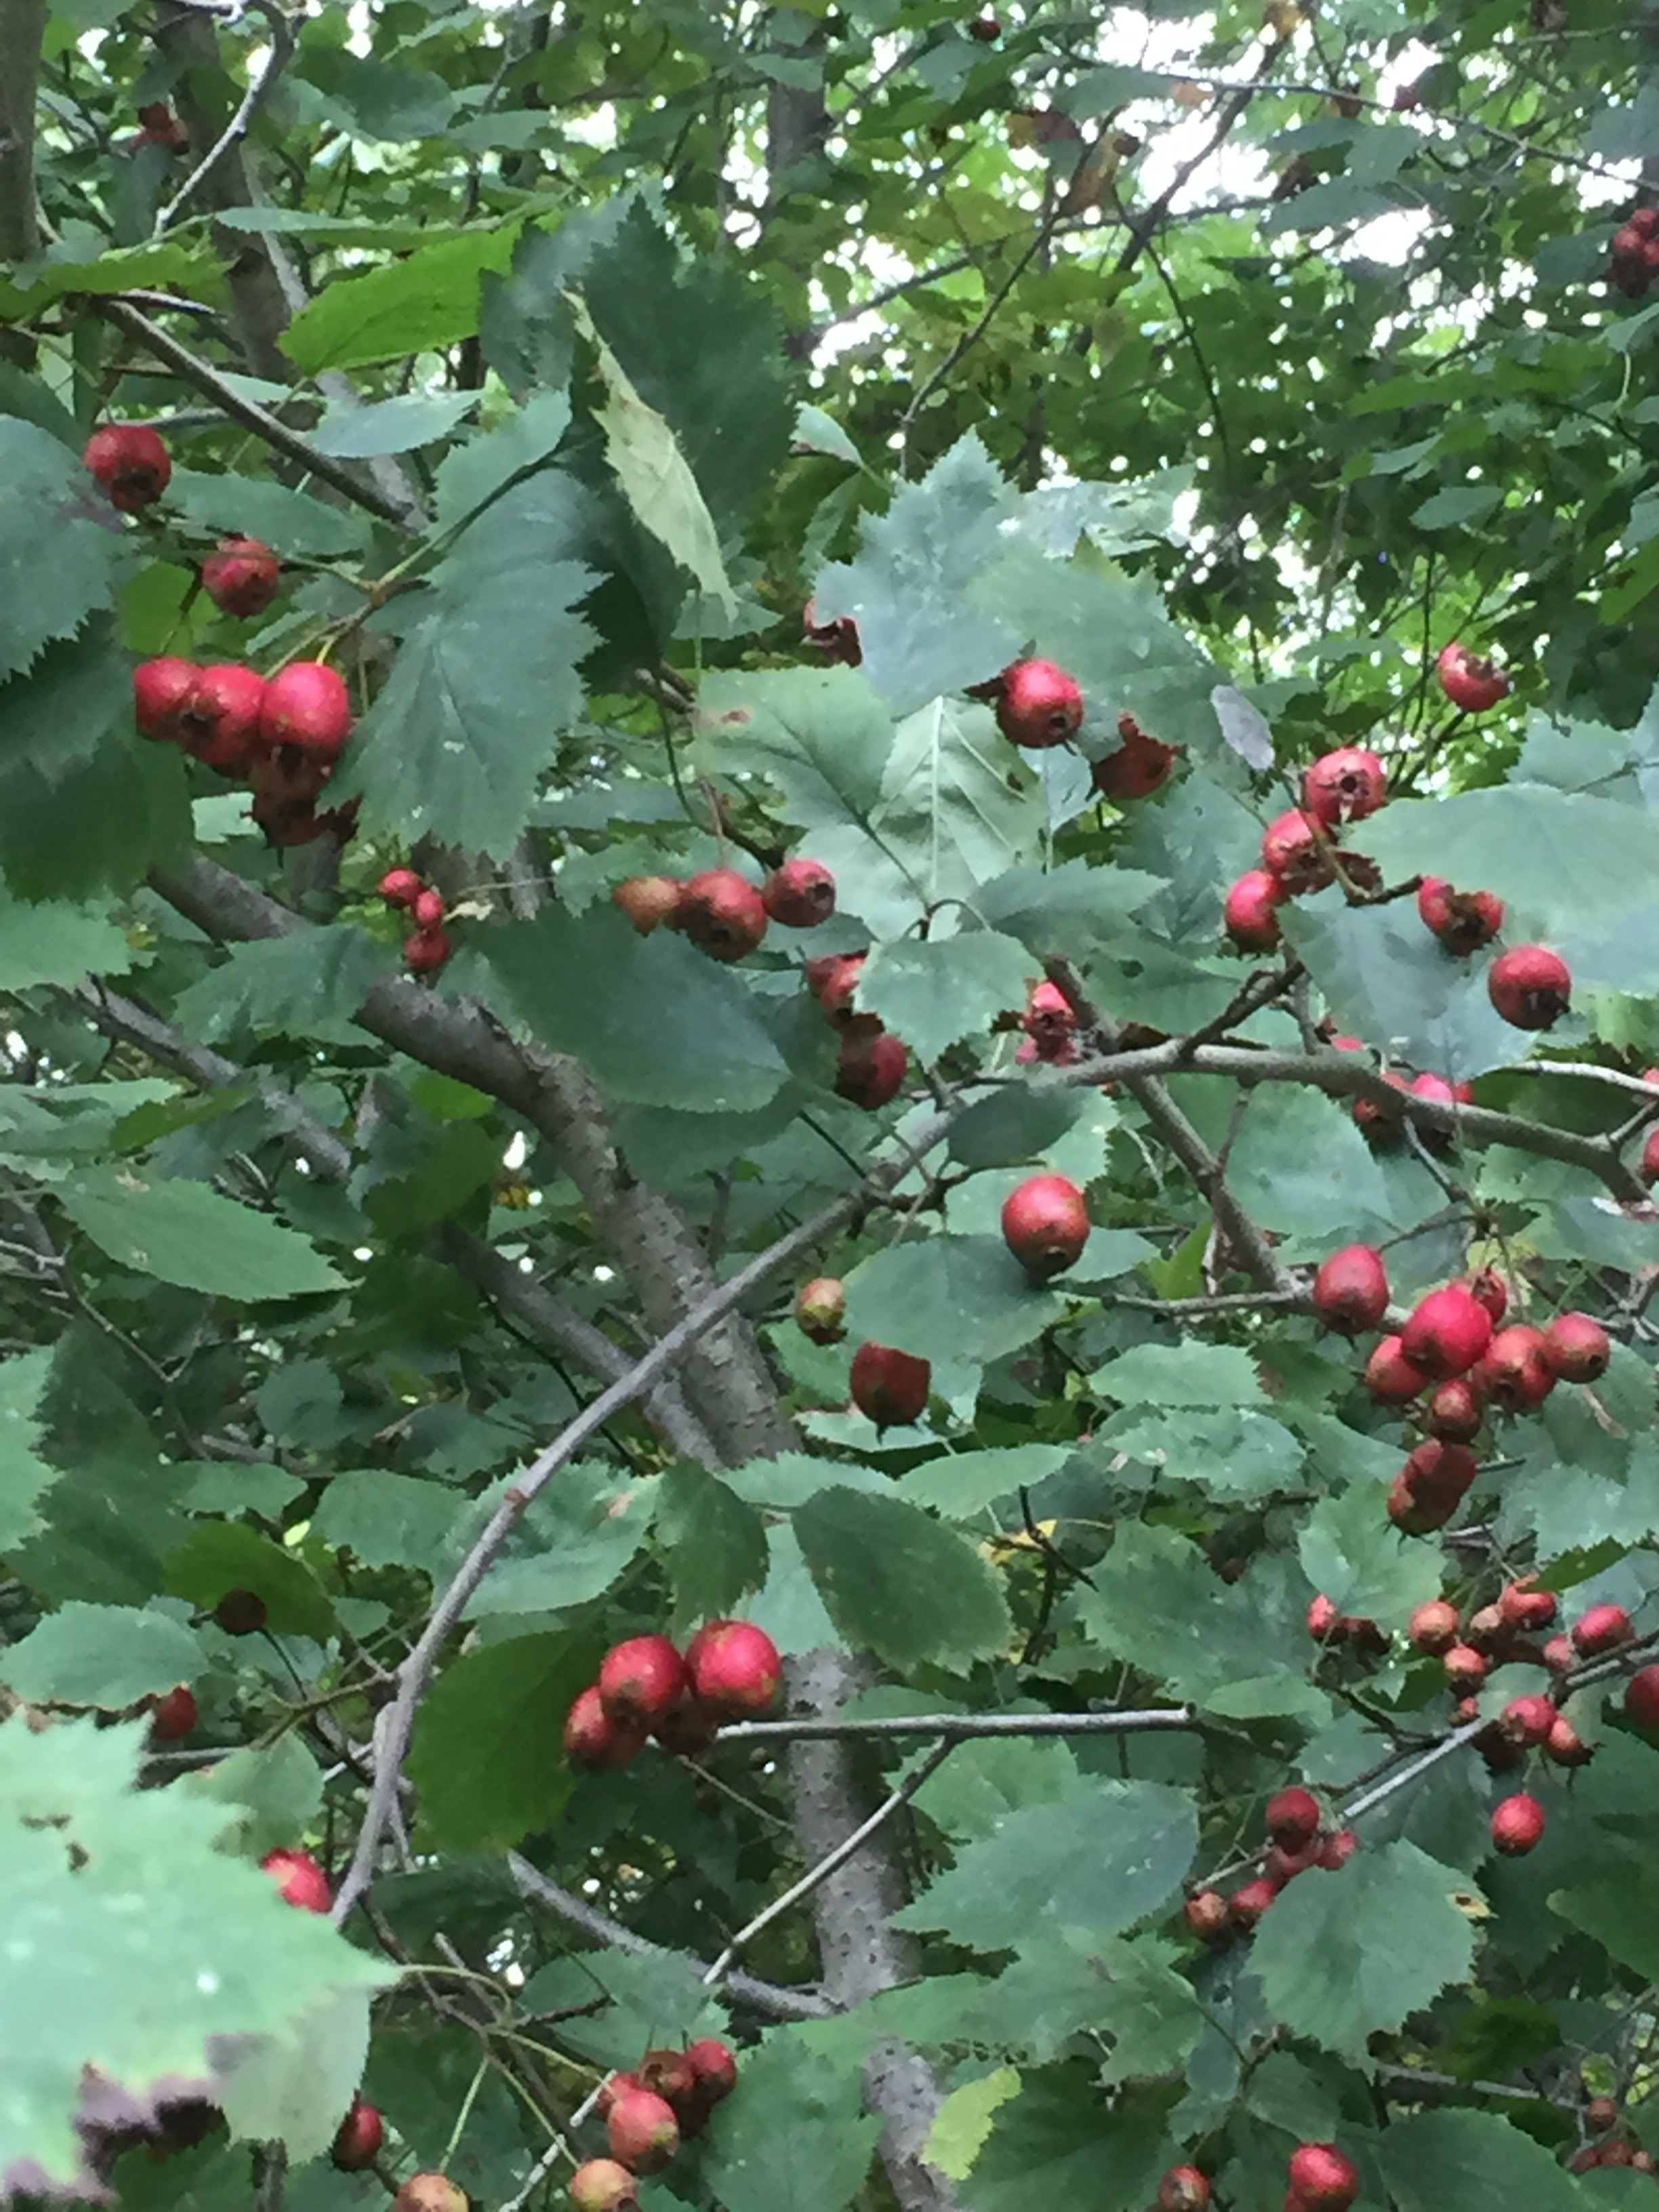 Hawthorn berries, full of medicine and life